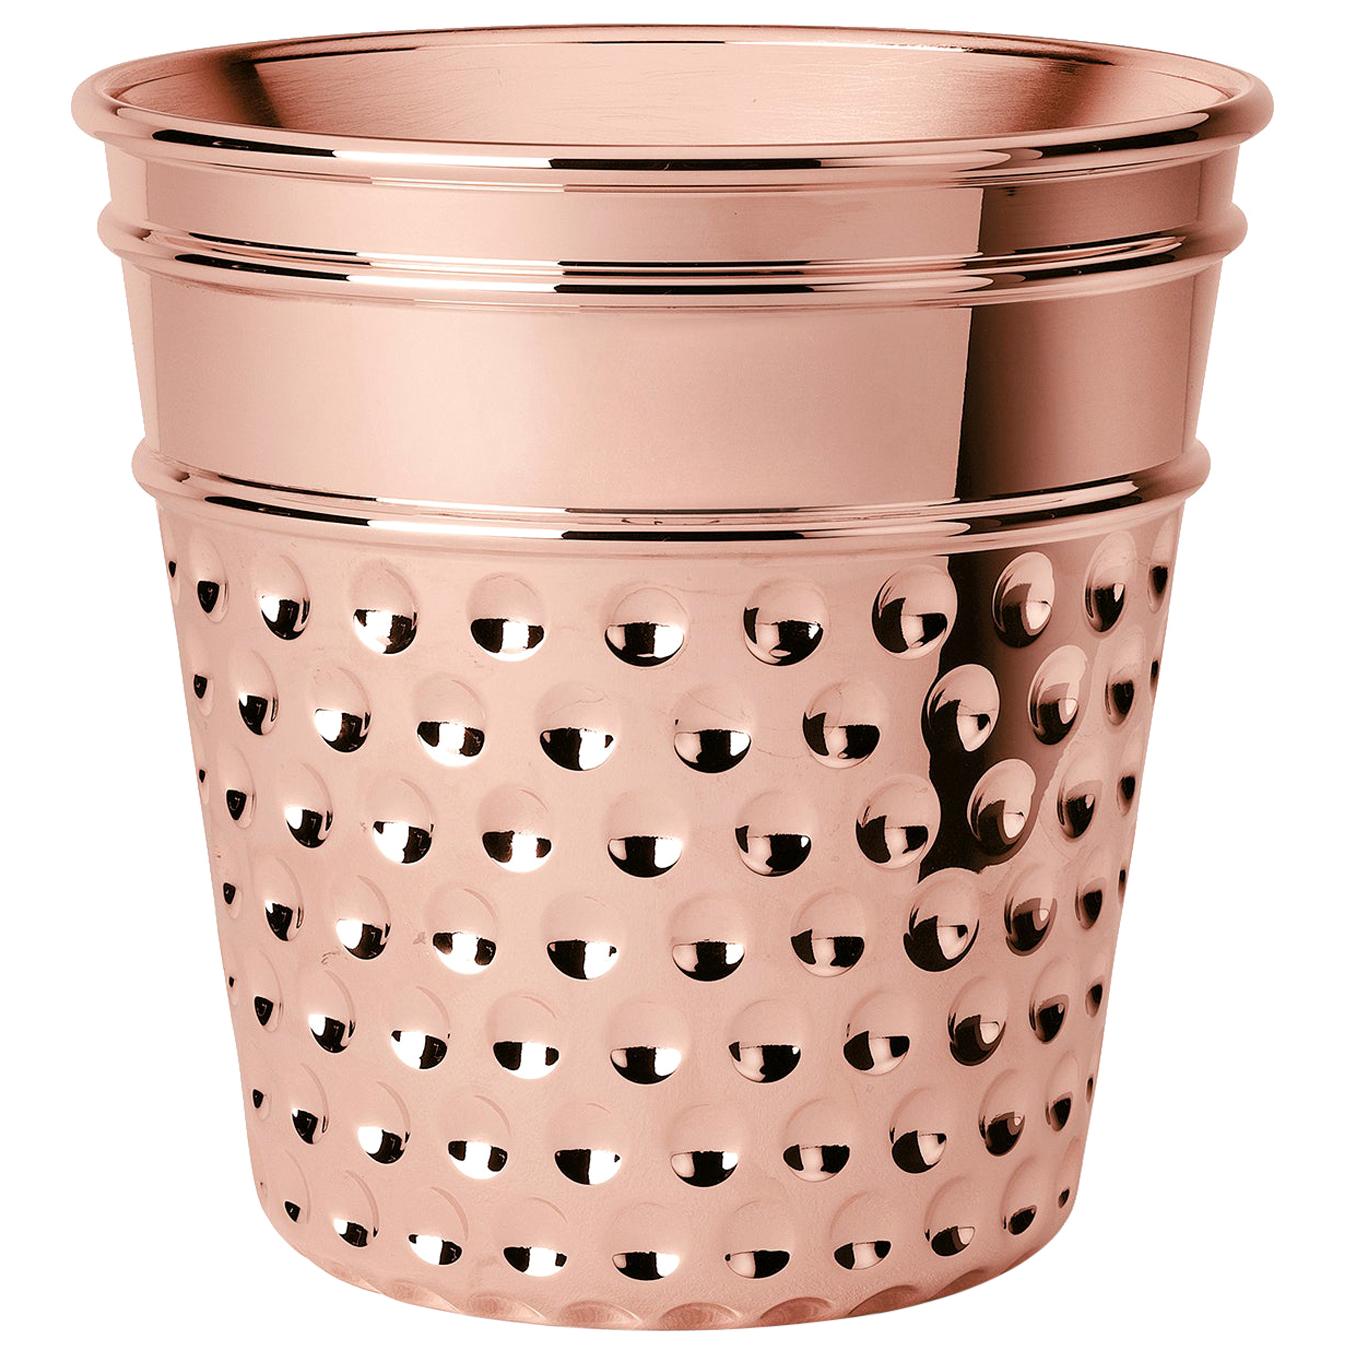 Here Ice Bucket in Copper Finish By Studio Job